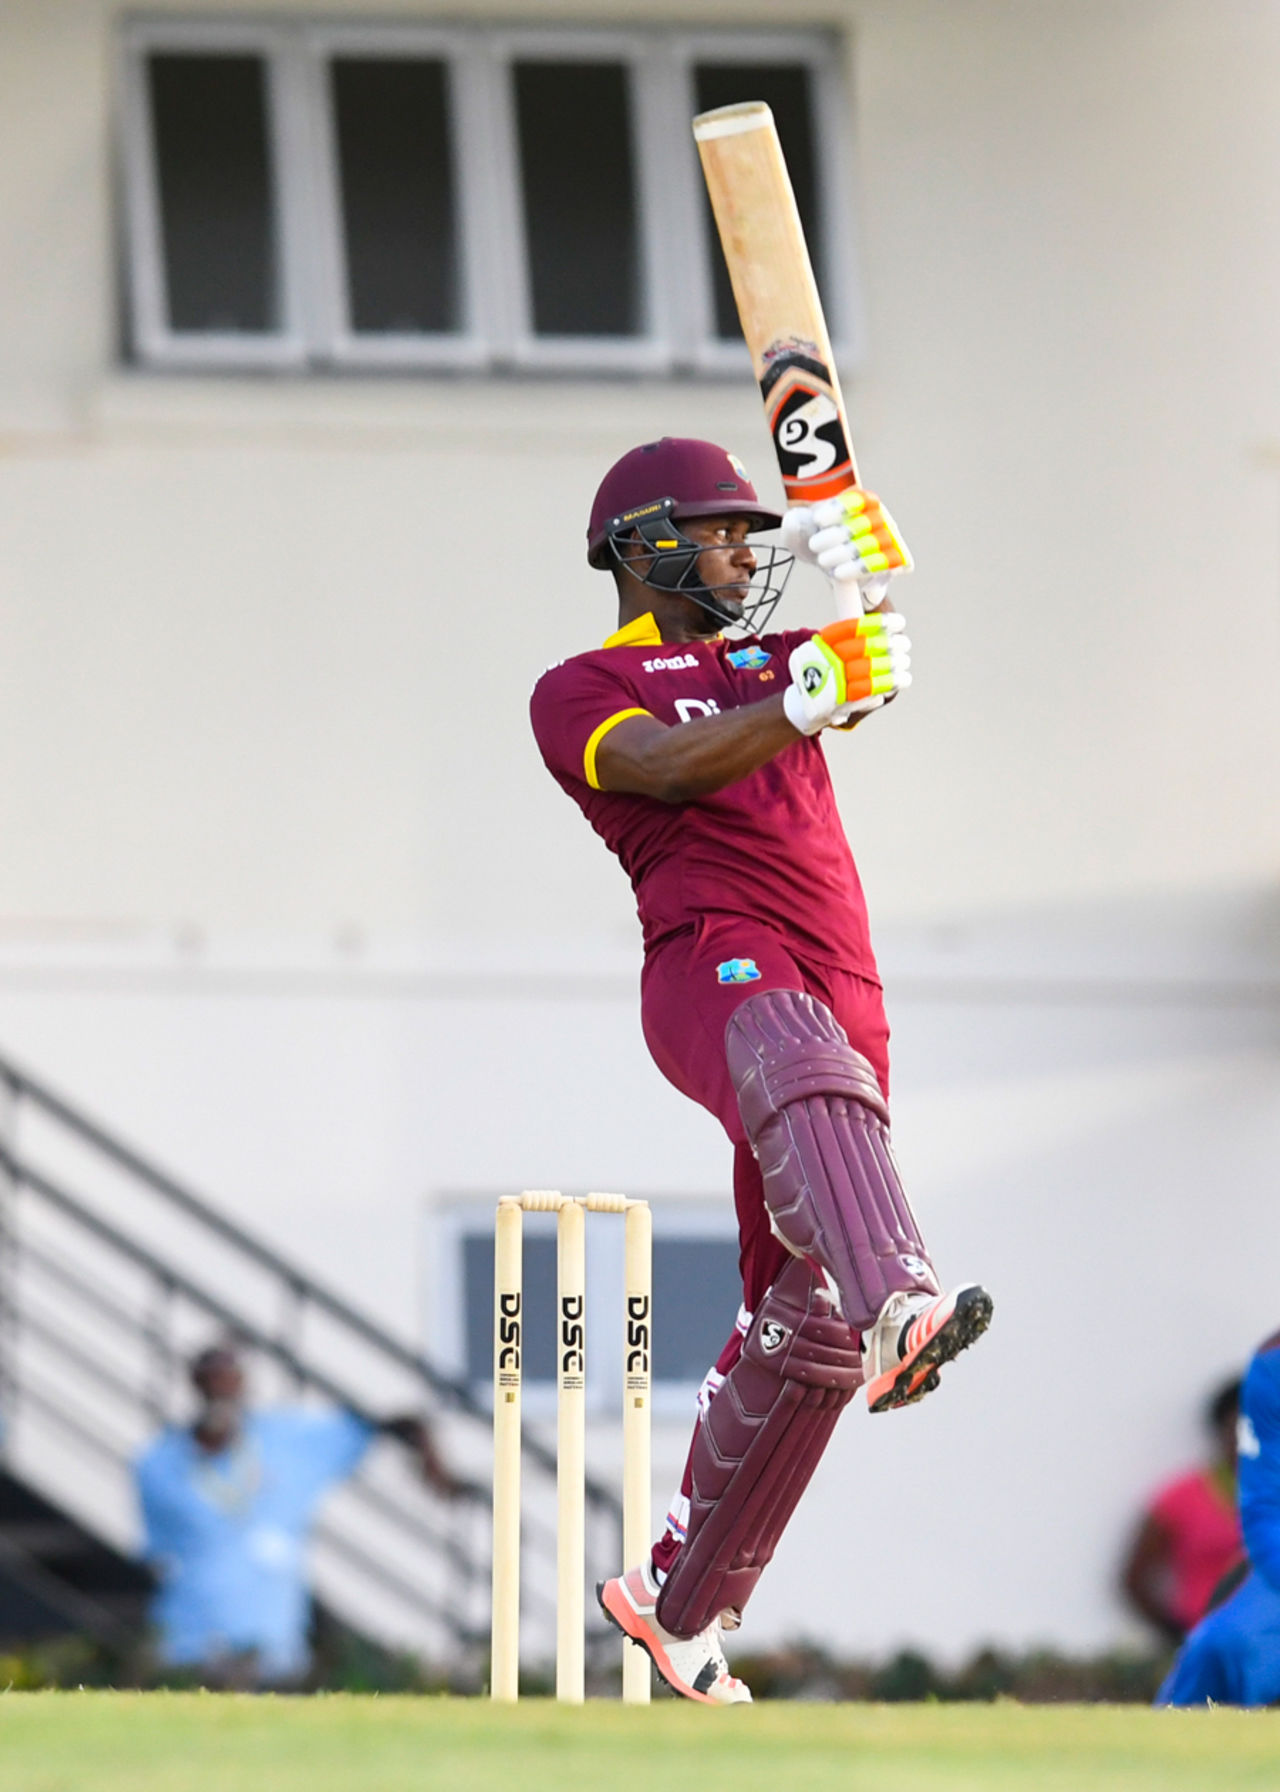 Evin Lewis tries to hold his shape after cutting one over backward point, West Indies v Afghanistan, 2nd ODI, Gros Islet, June 11, 2017